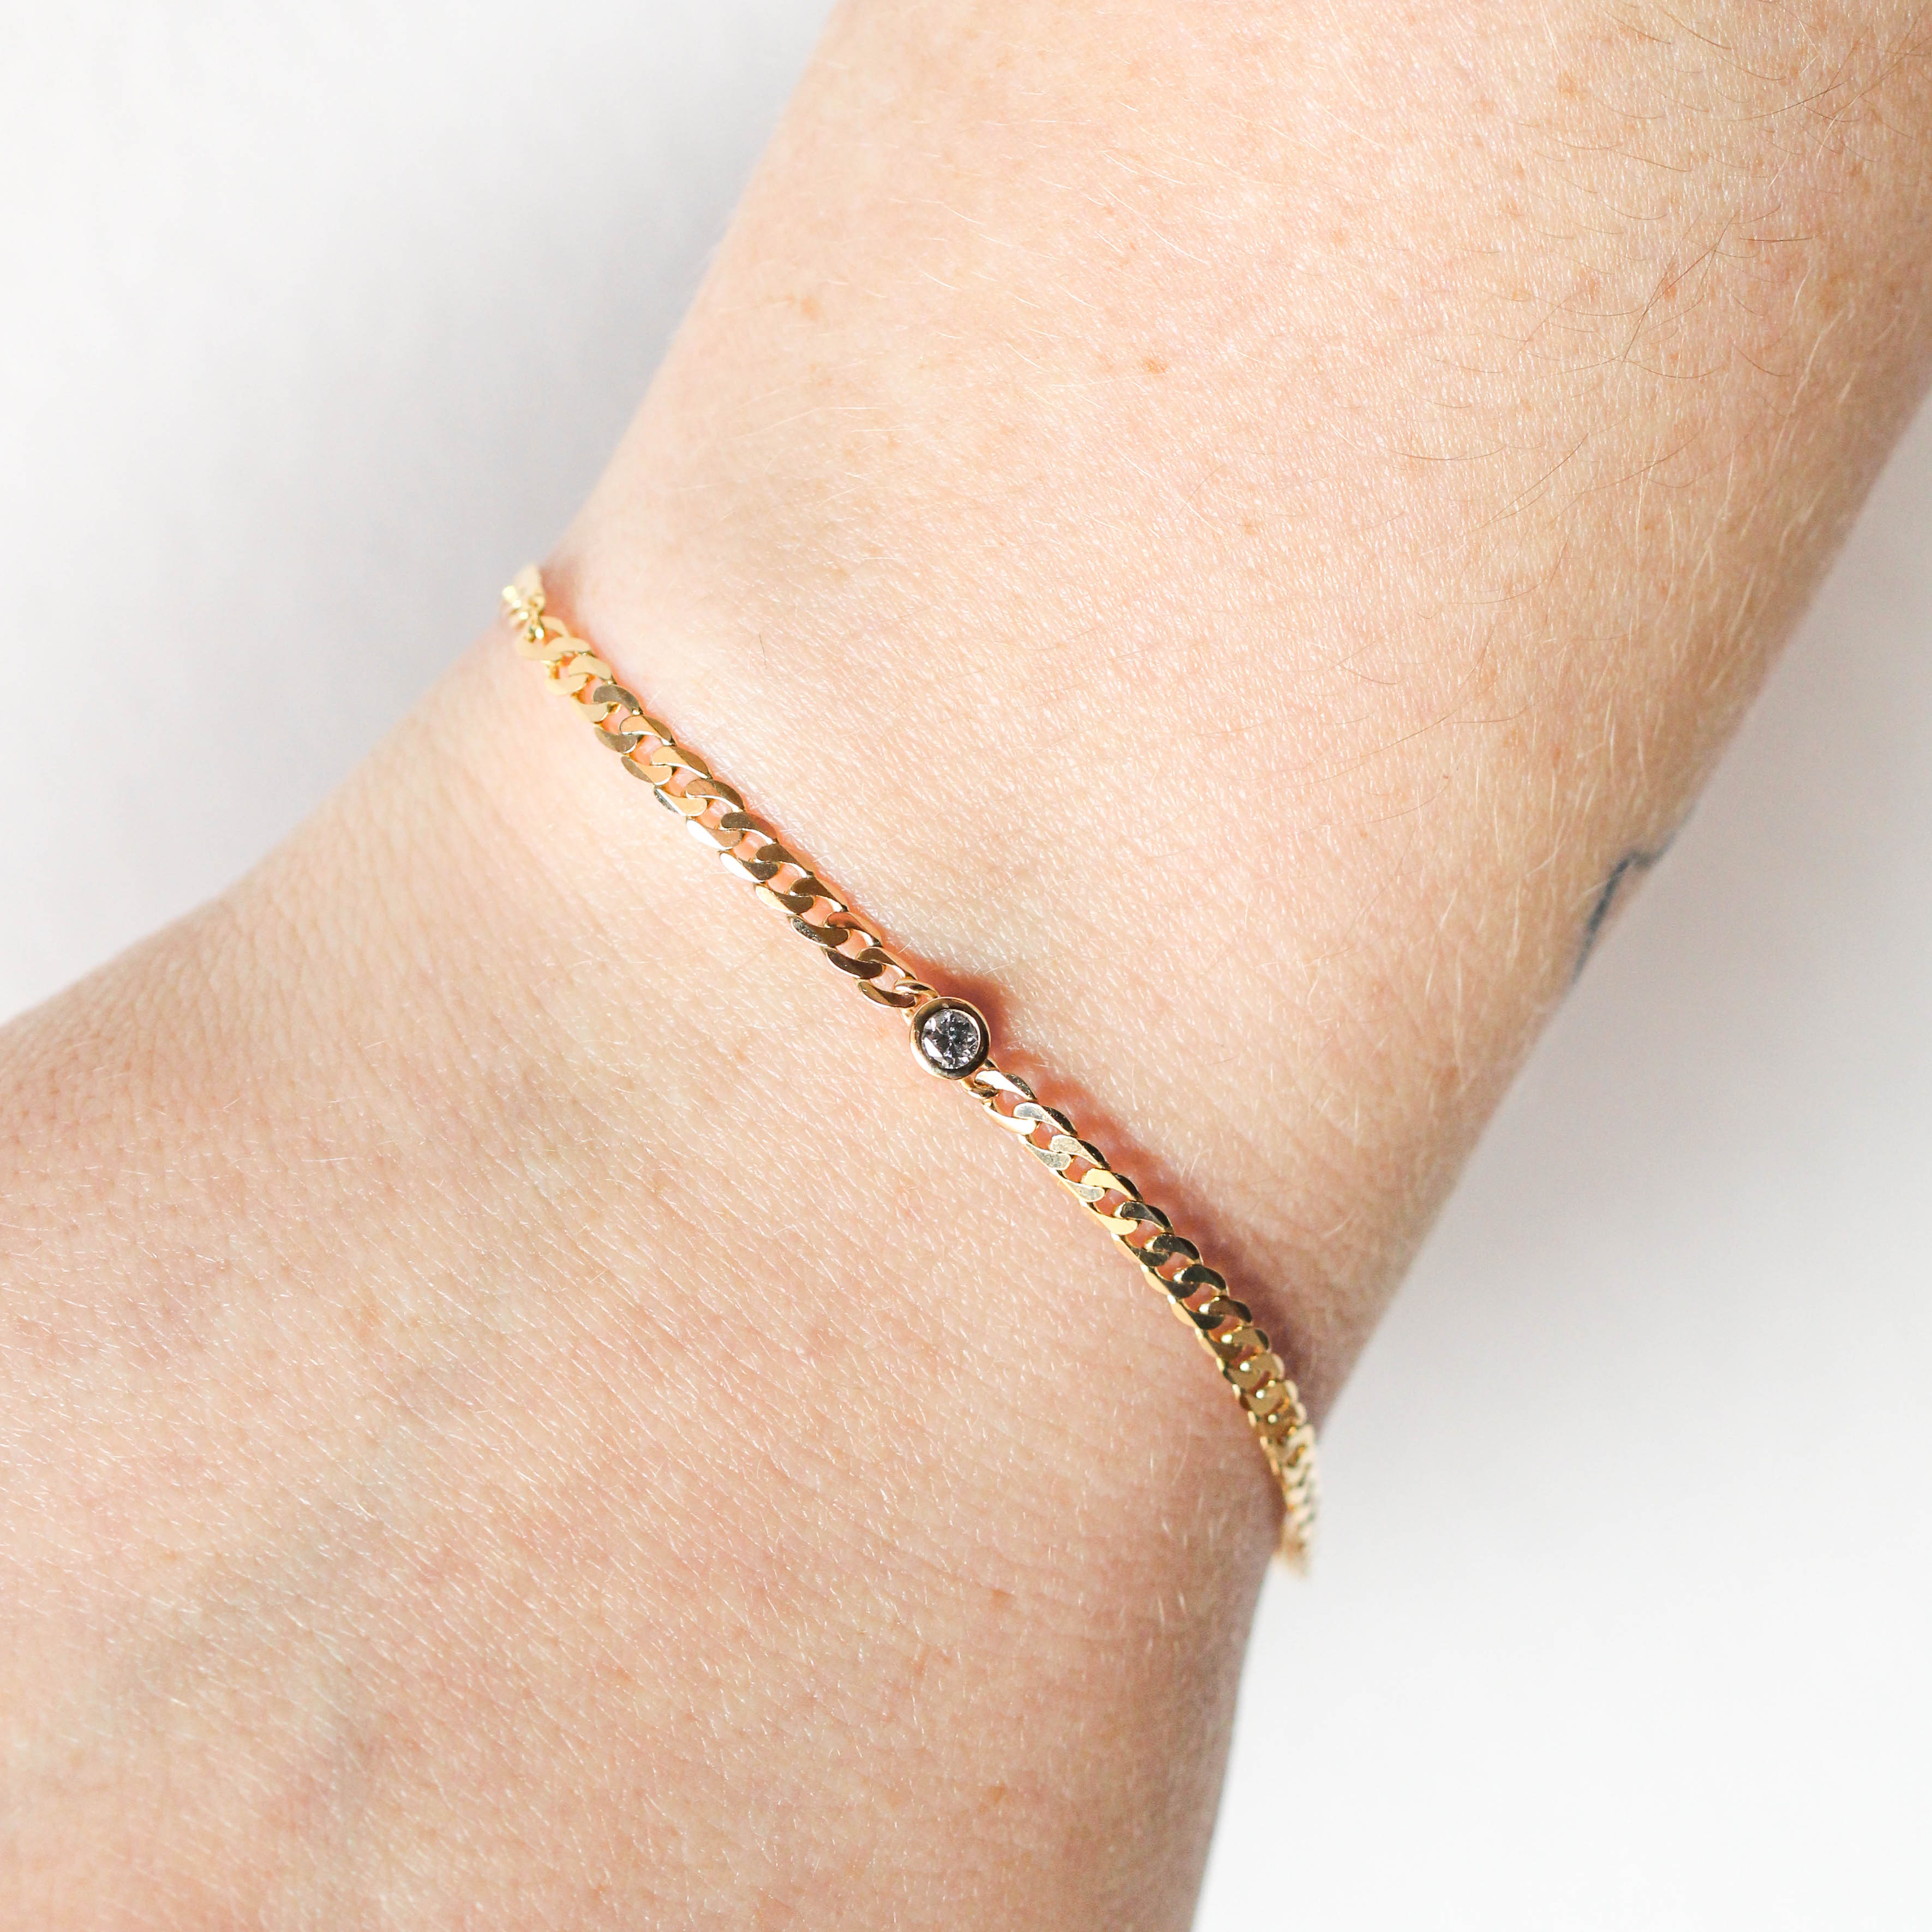 Delicate Dew Drops Bracelet in Gold, Rose Gold, and Sterling Silver -  Danique Jewelry